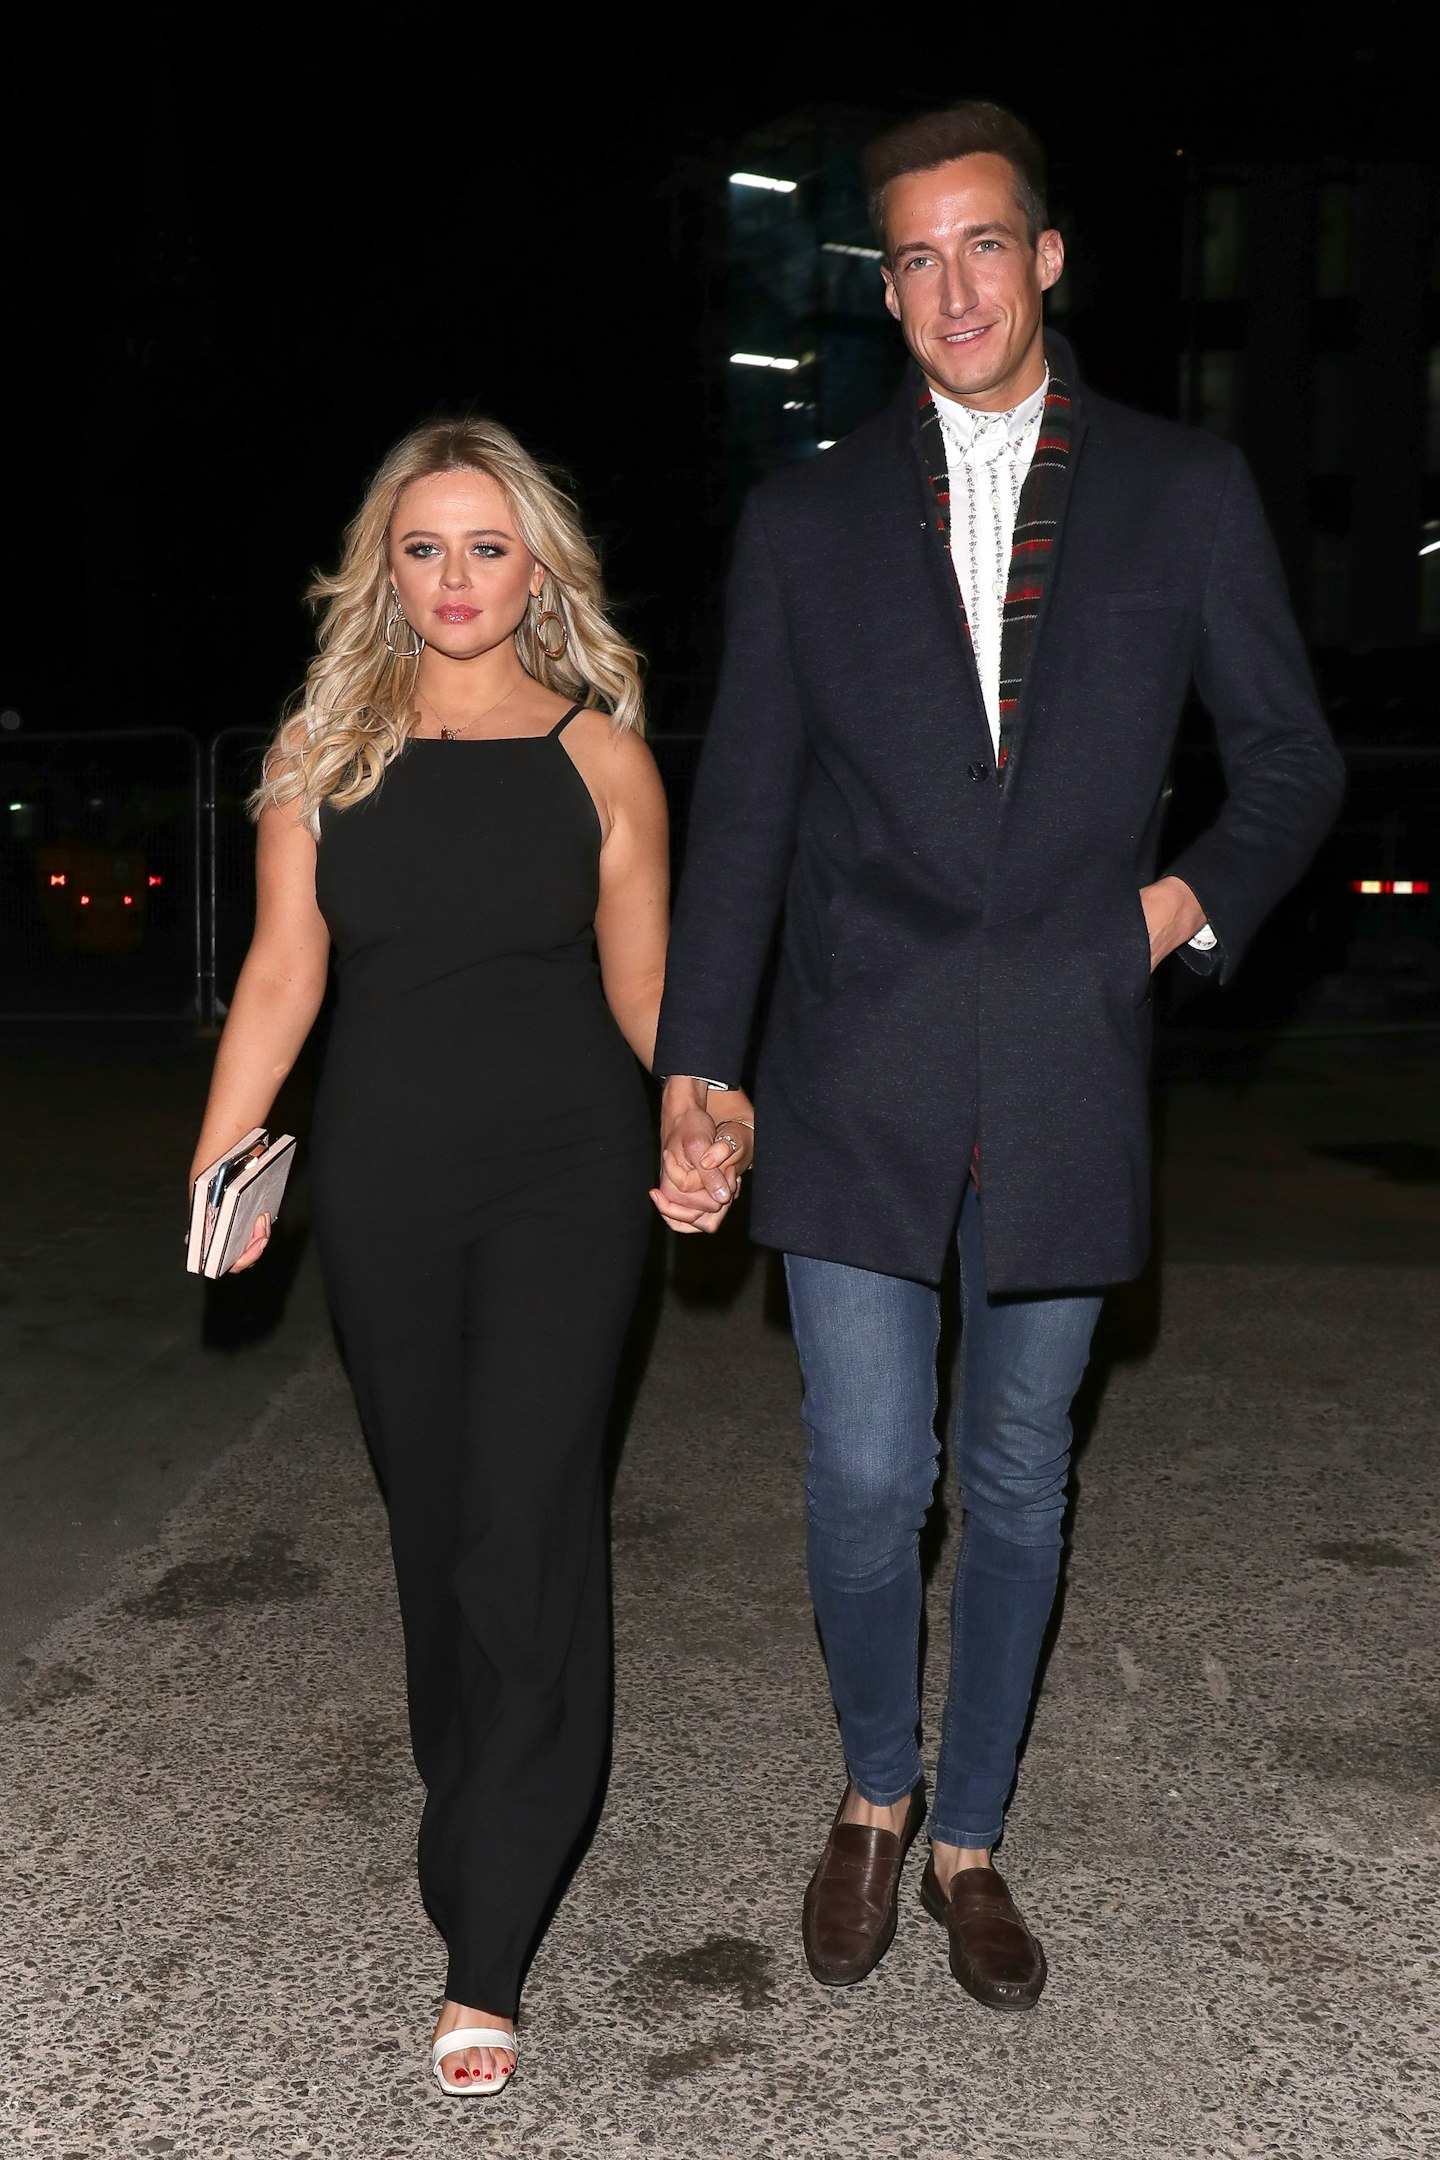 Emily Atack and Rob Jowers walking in the street